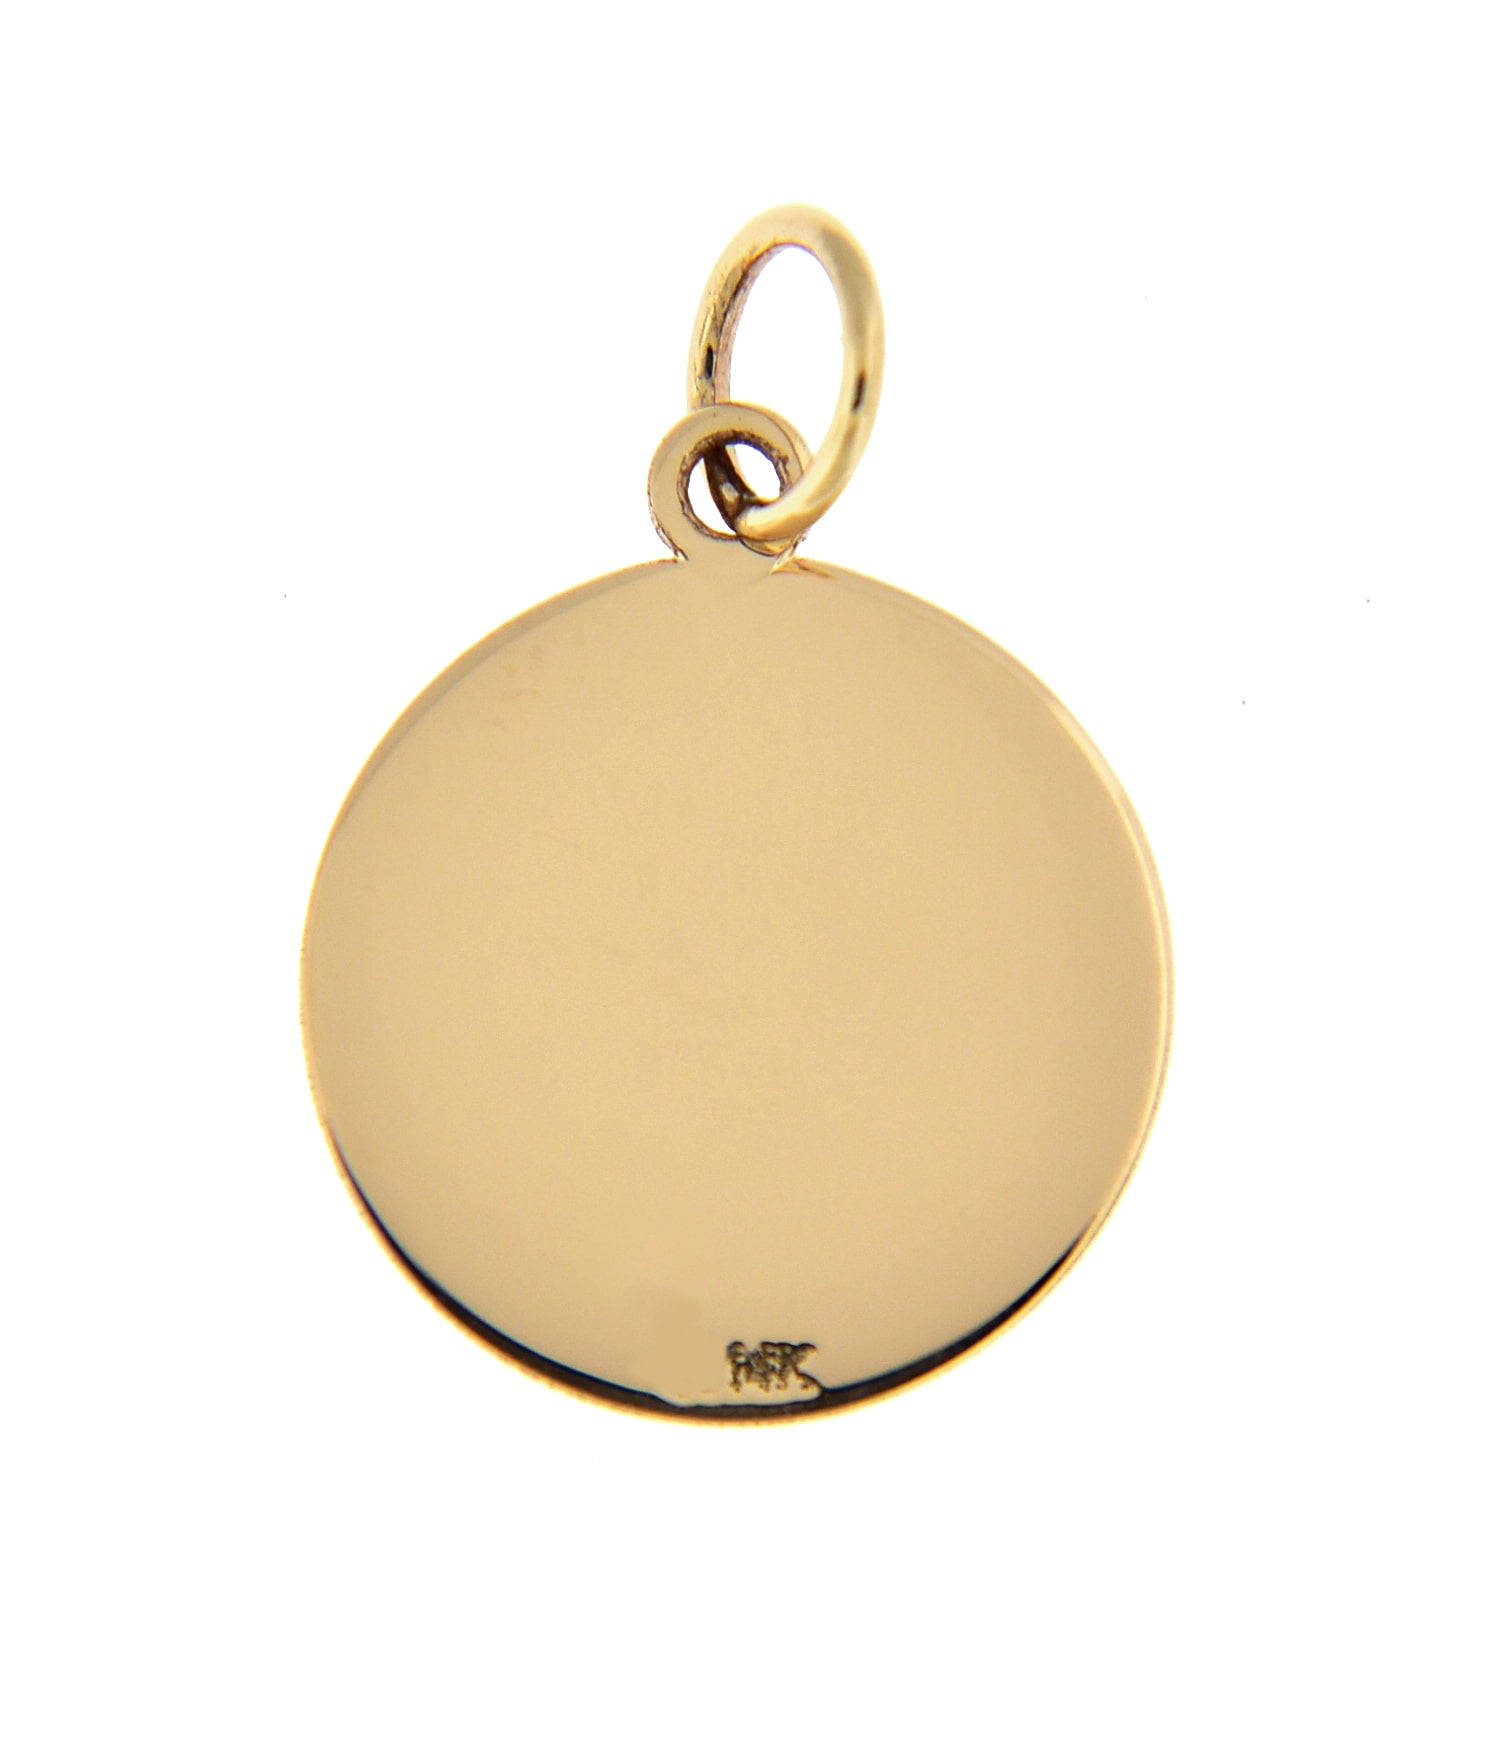 14K Yellow Gold 14mm Round Disc Pendant Charm Letter Initial Engraved Personalized Monogram